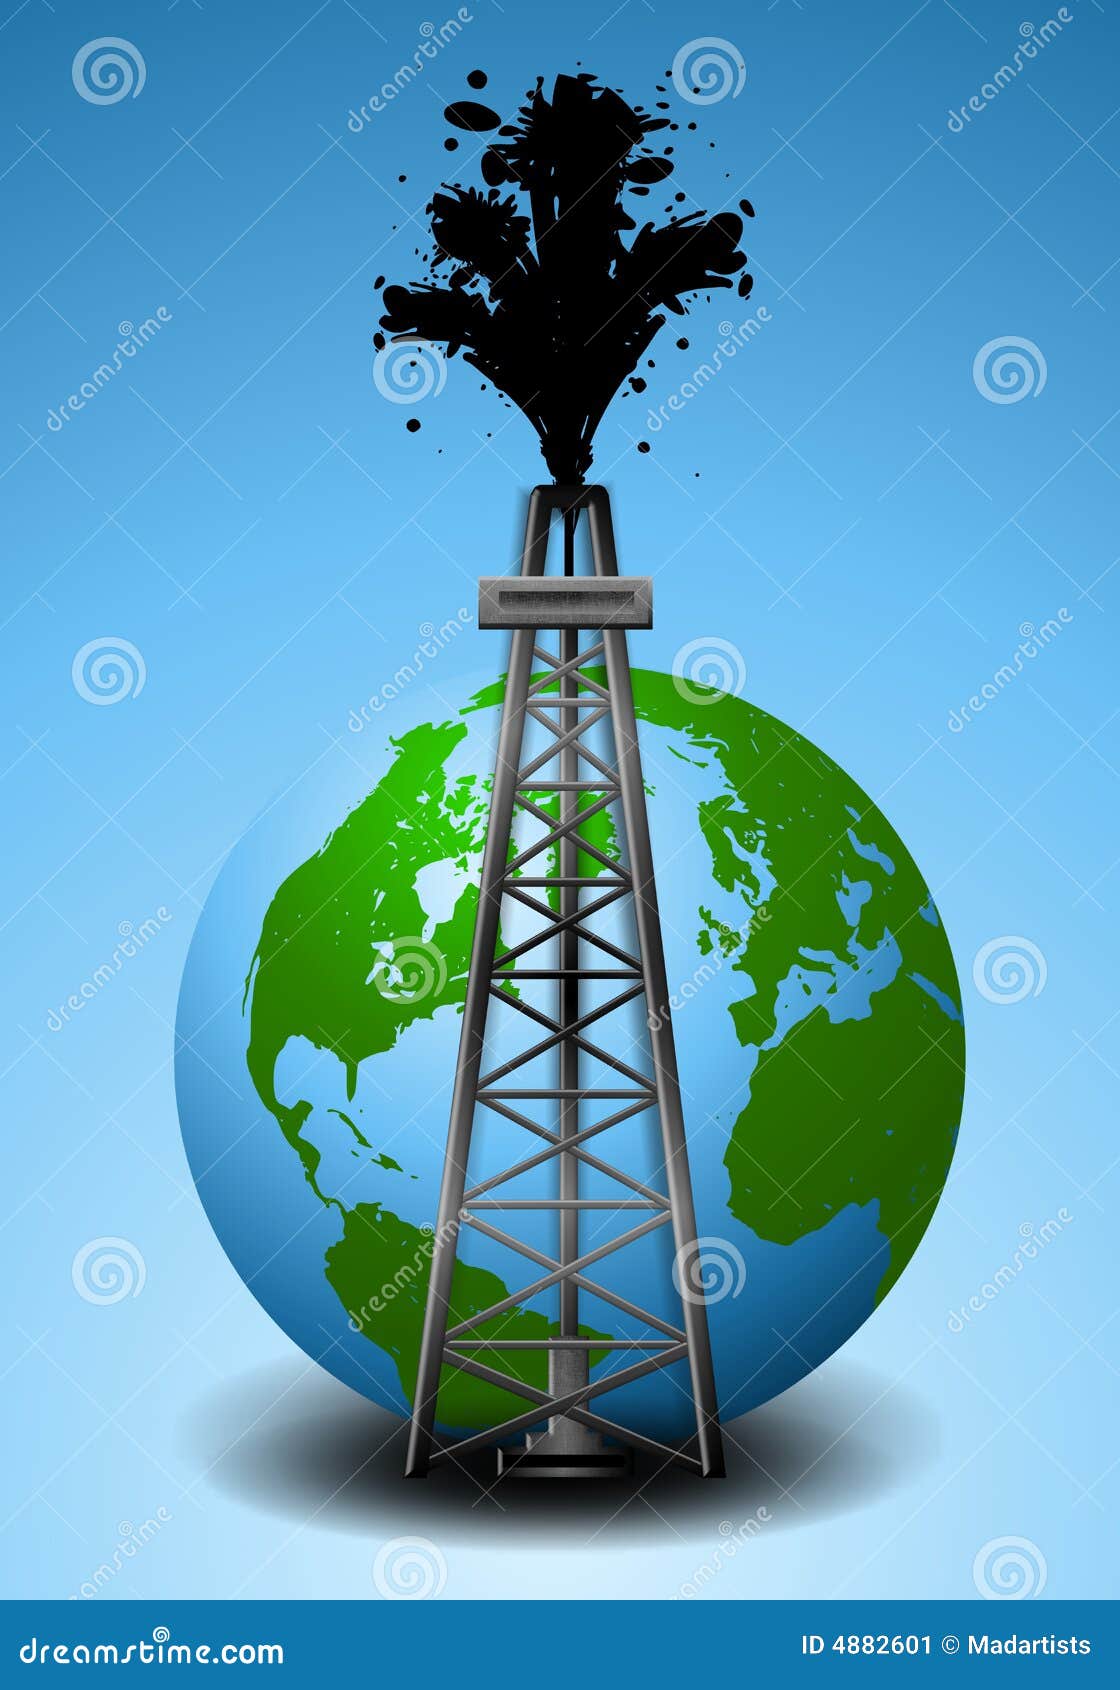 oil drilling rig and earth